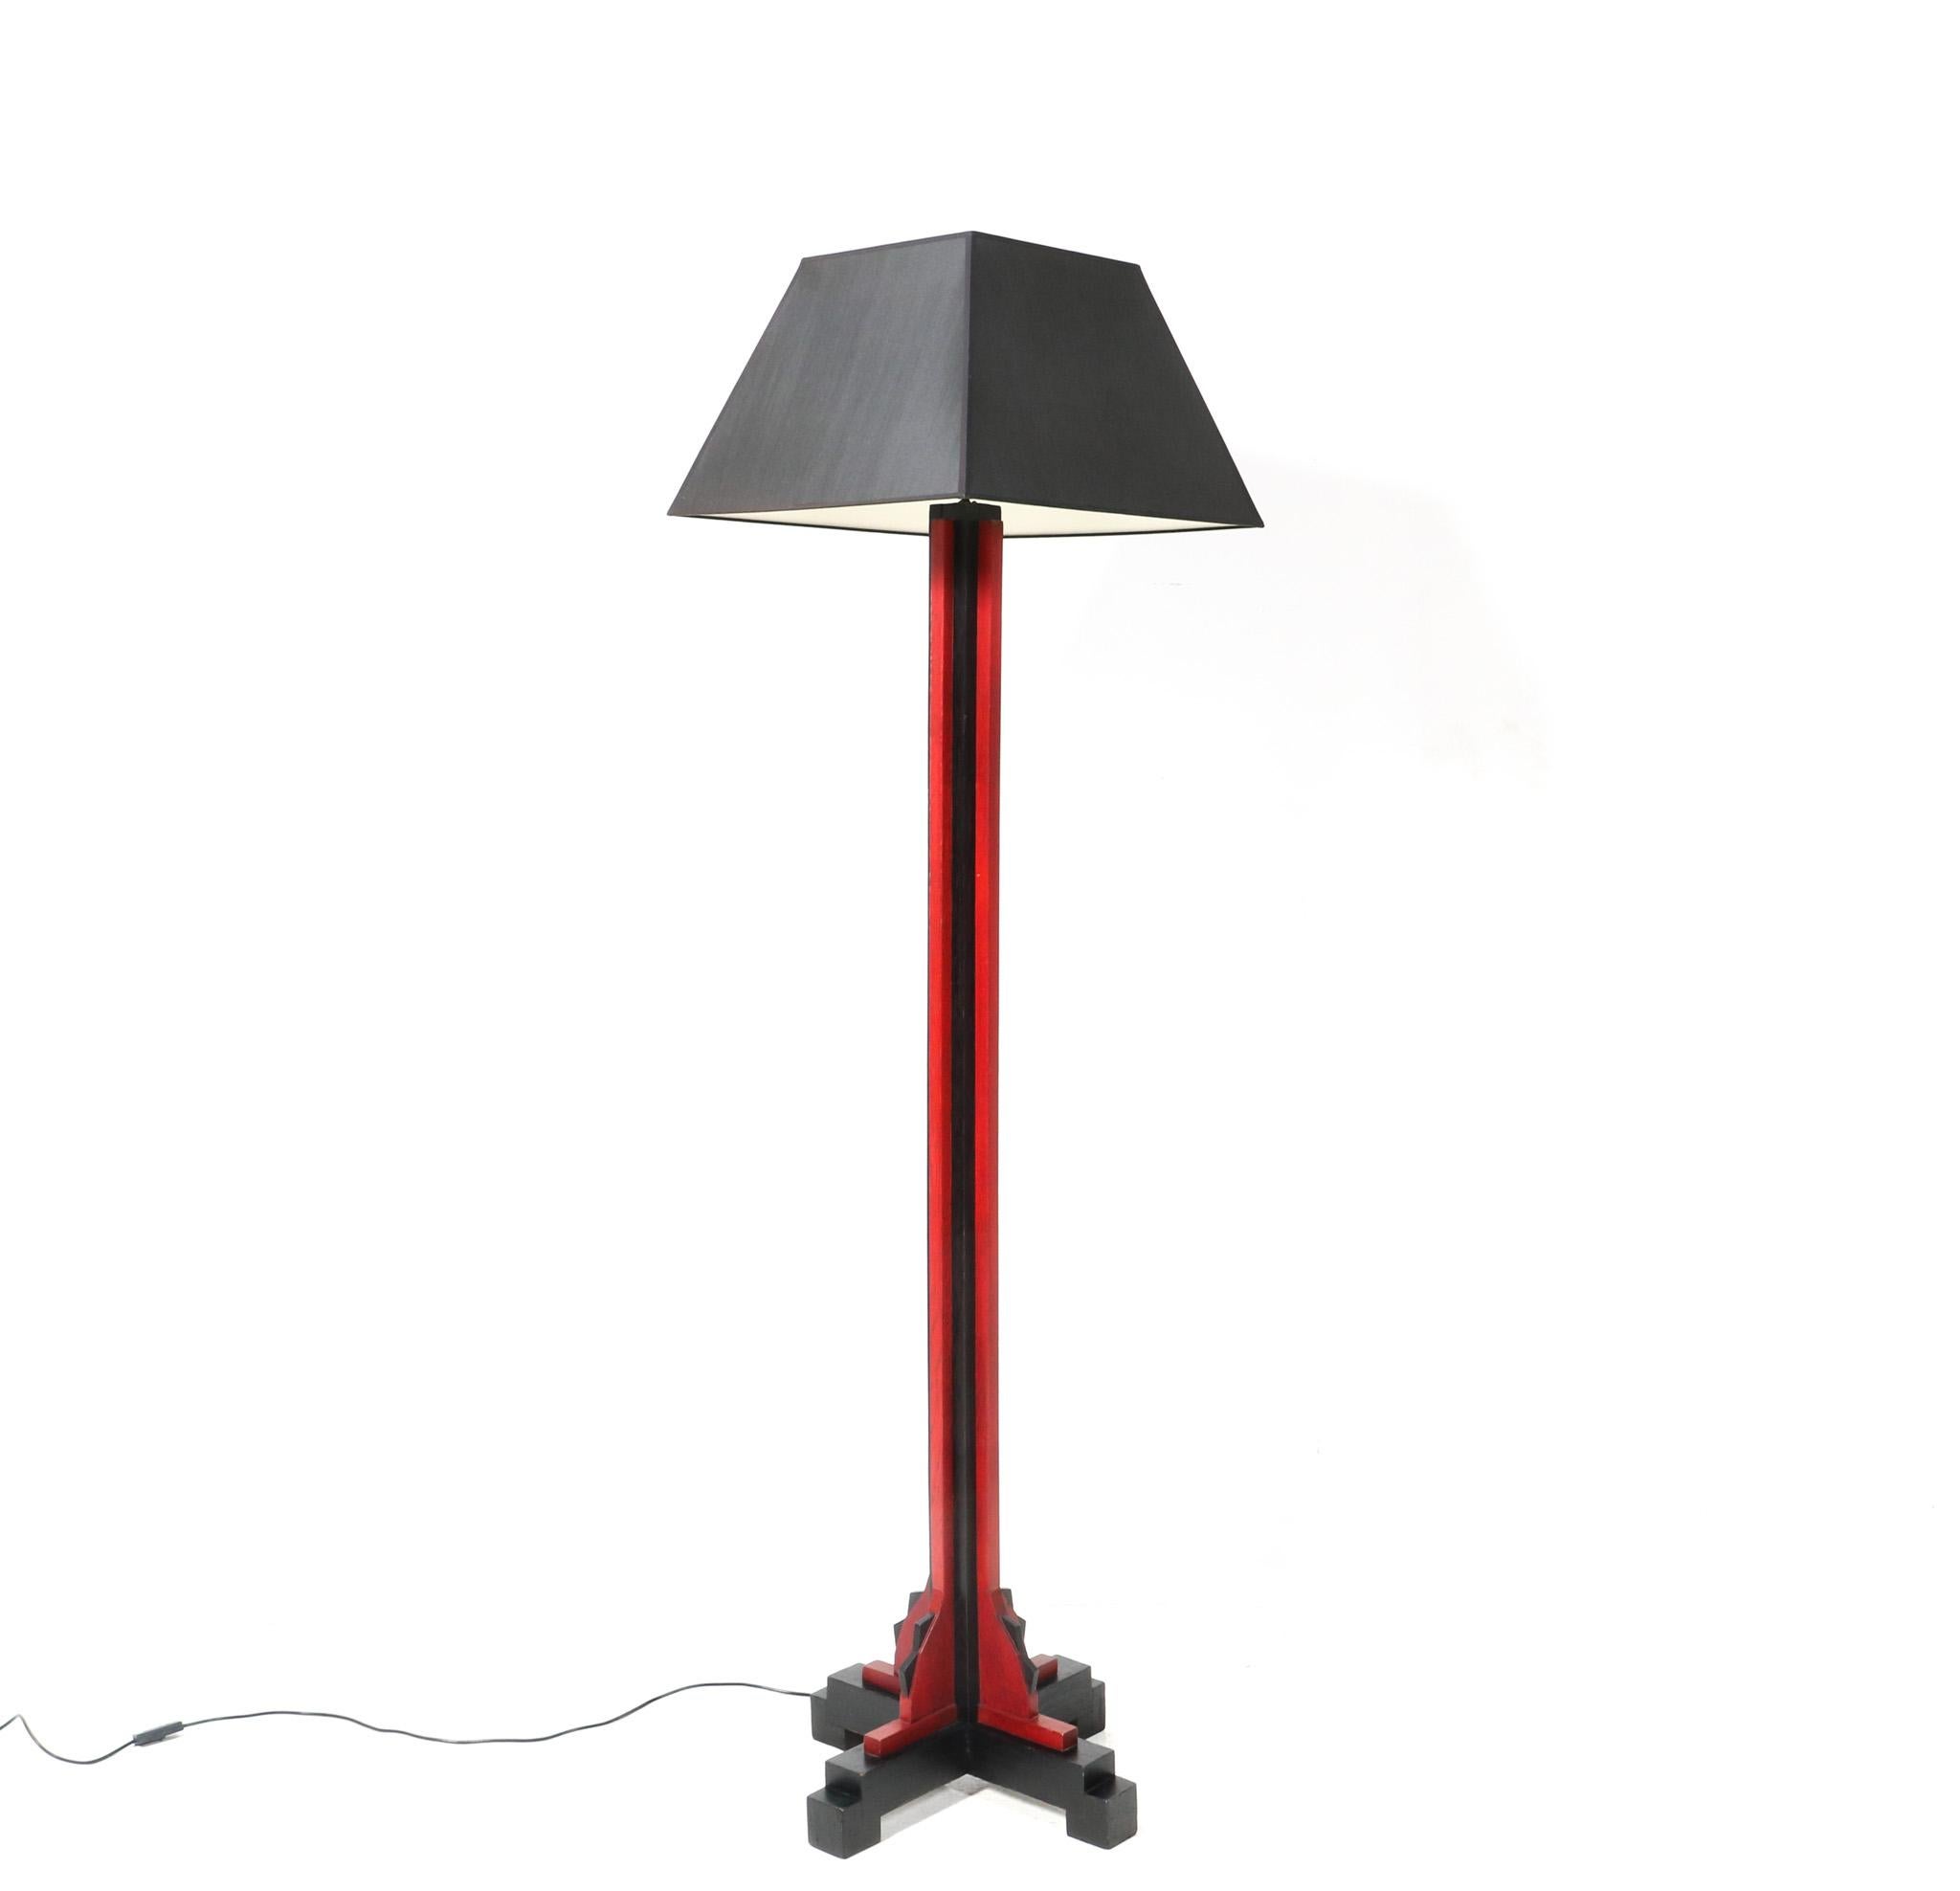 Magnificent and rare Art Deco Modernist floor lamp.
Design by Cor Alons.
Striking Dutch design from the 1920s.
Black and red lacquered solid oak base with new black fabric shade.
Rewired with one new socket for E-27 light bulb.
In very good